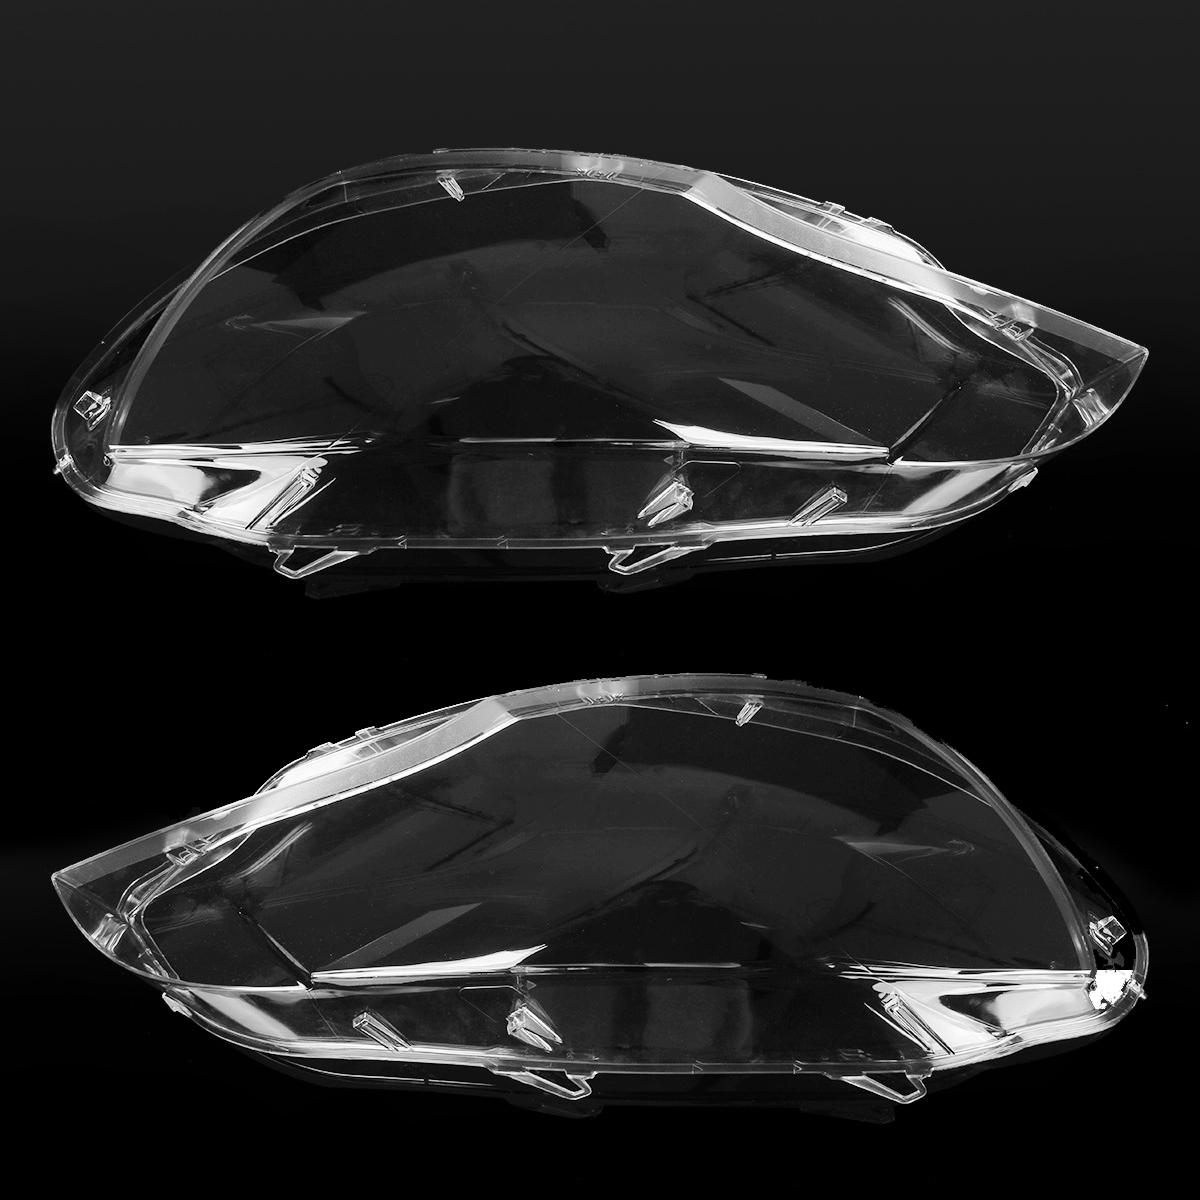 Car Replacement Headlight Lamp Plastic Cover Lens For BMW E71 X6 2008-2014